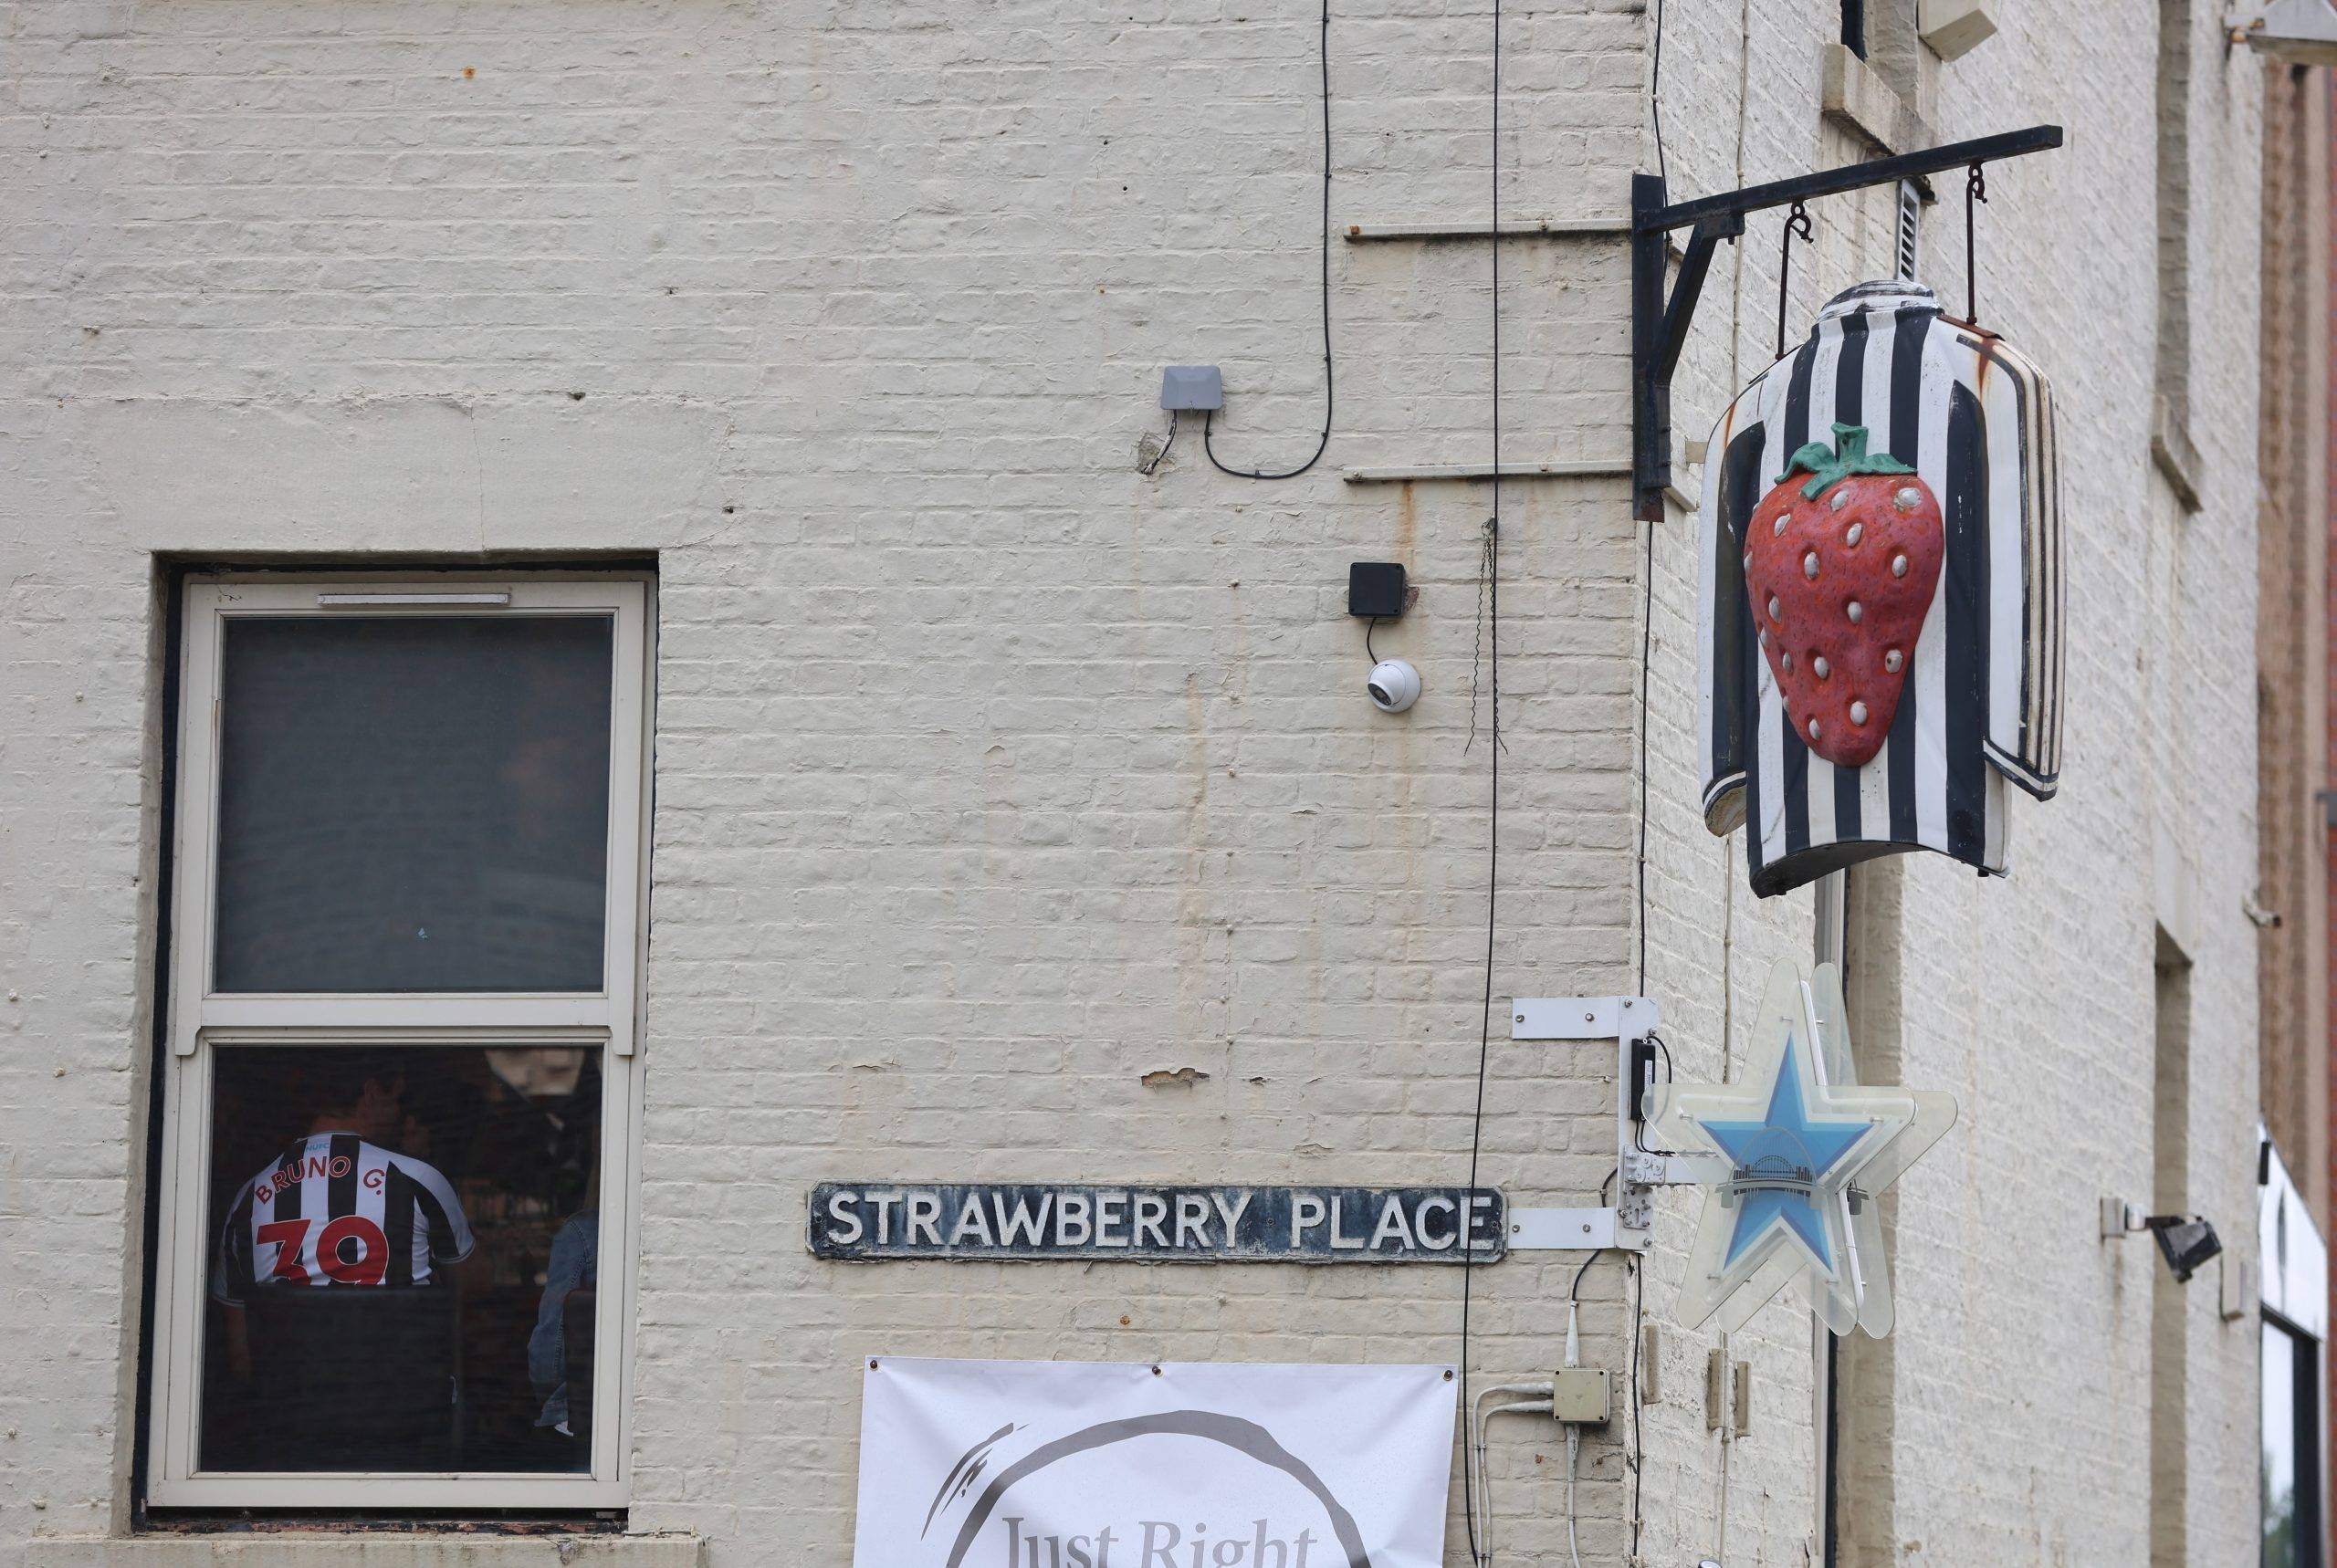 Newcastle United: Magpies media buzzing as club buy back Strawberry Place - Newcastle United News